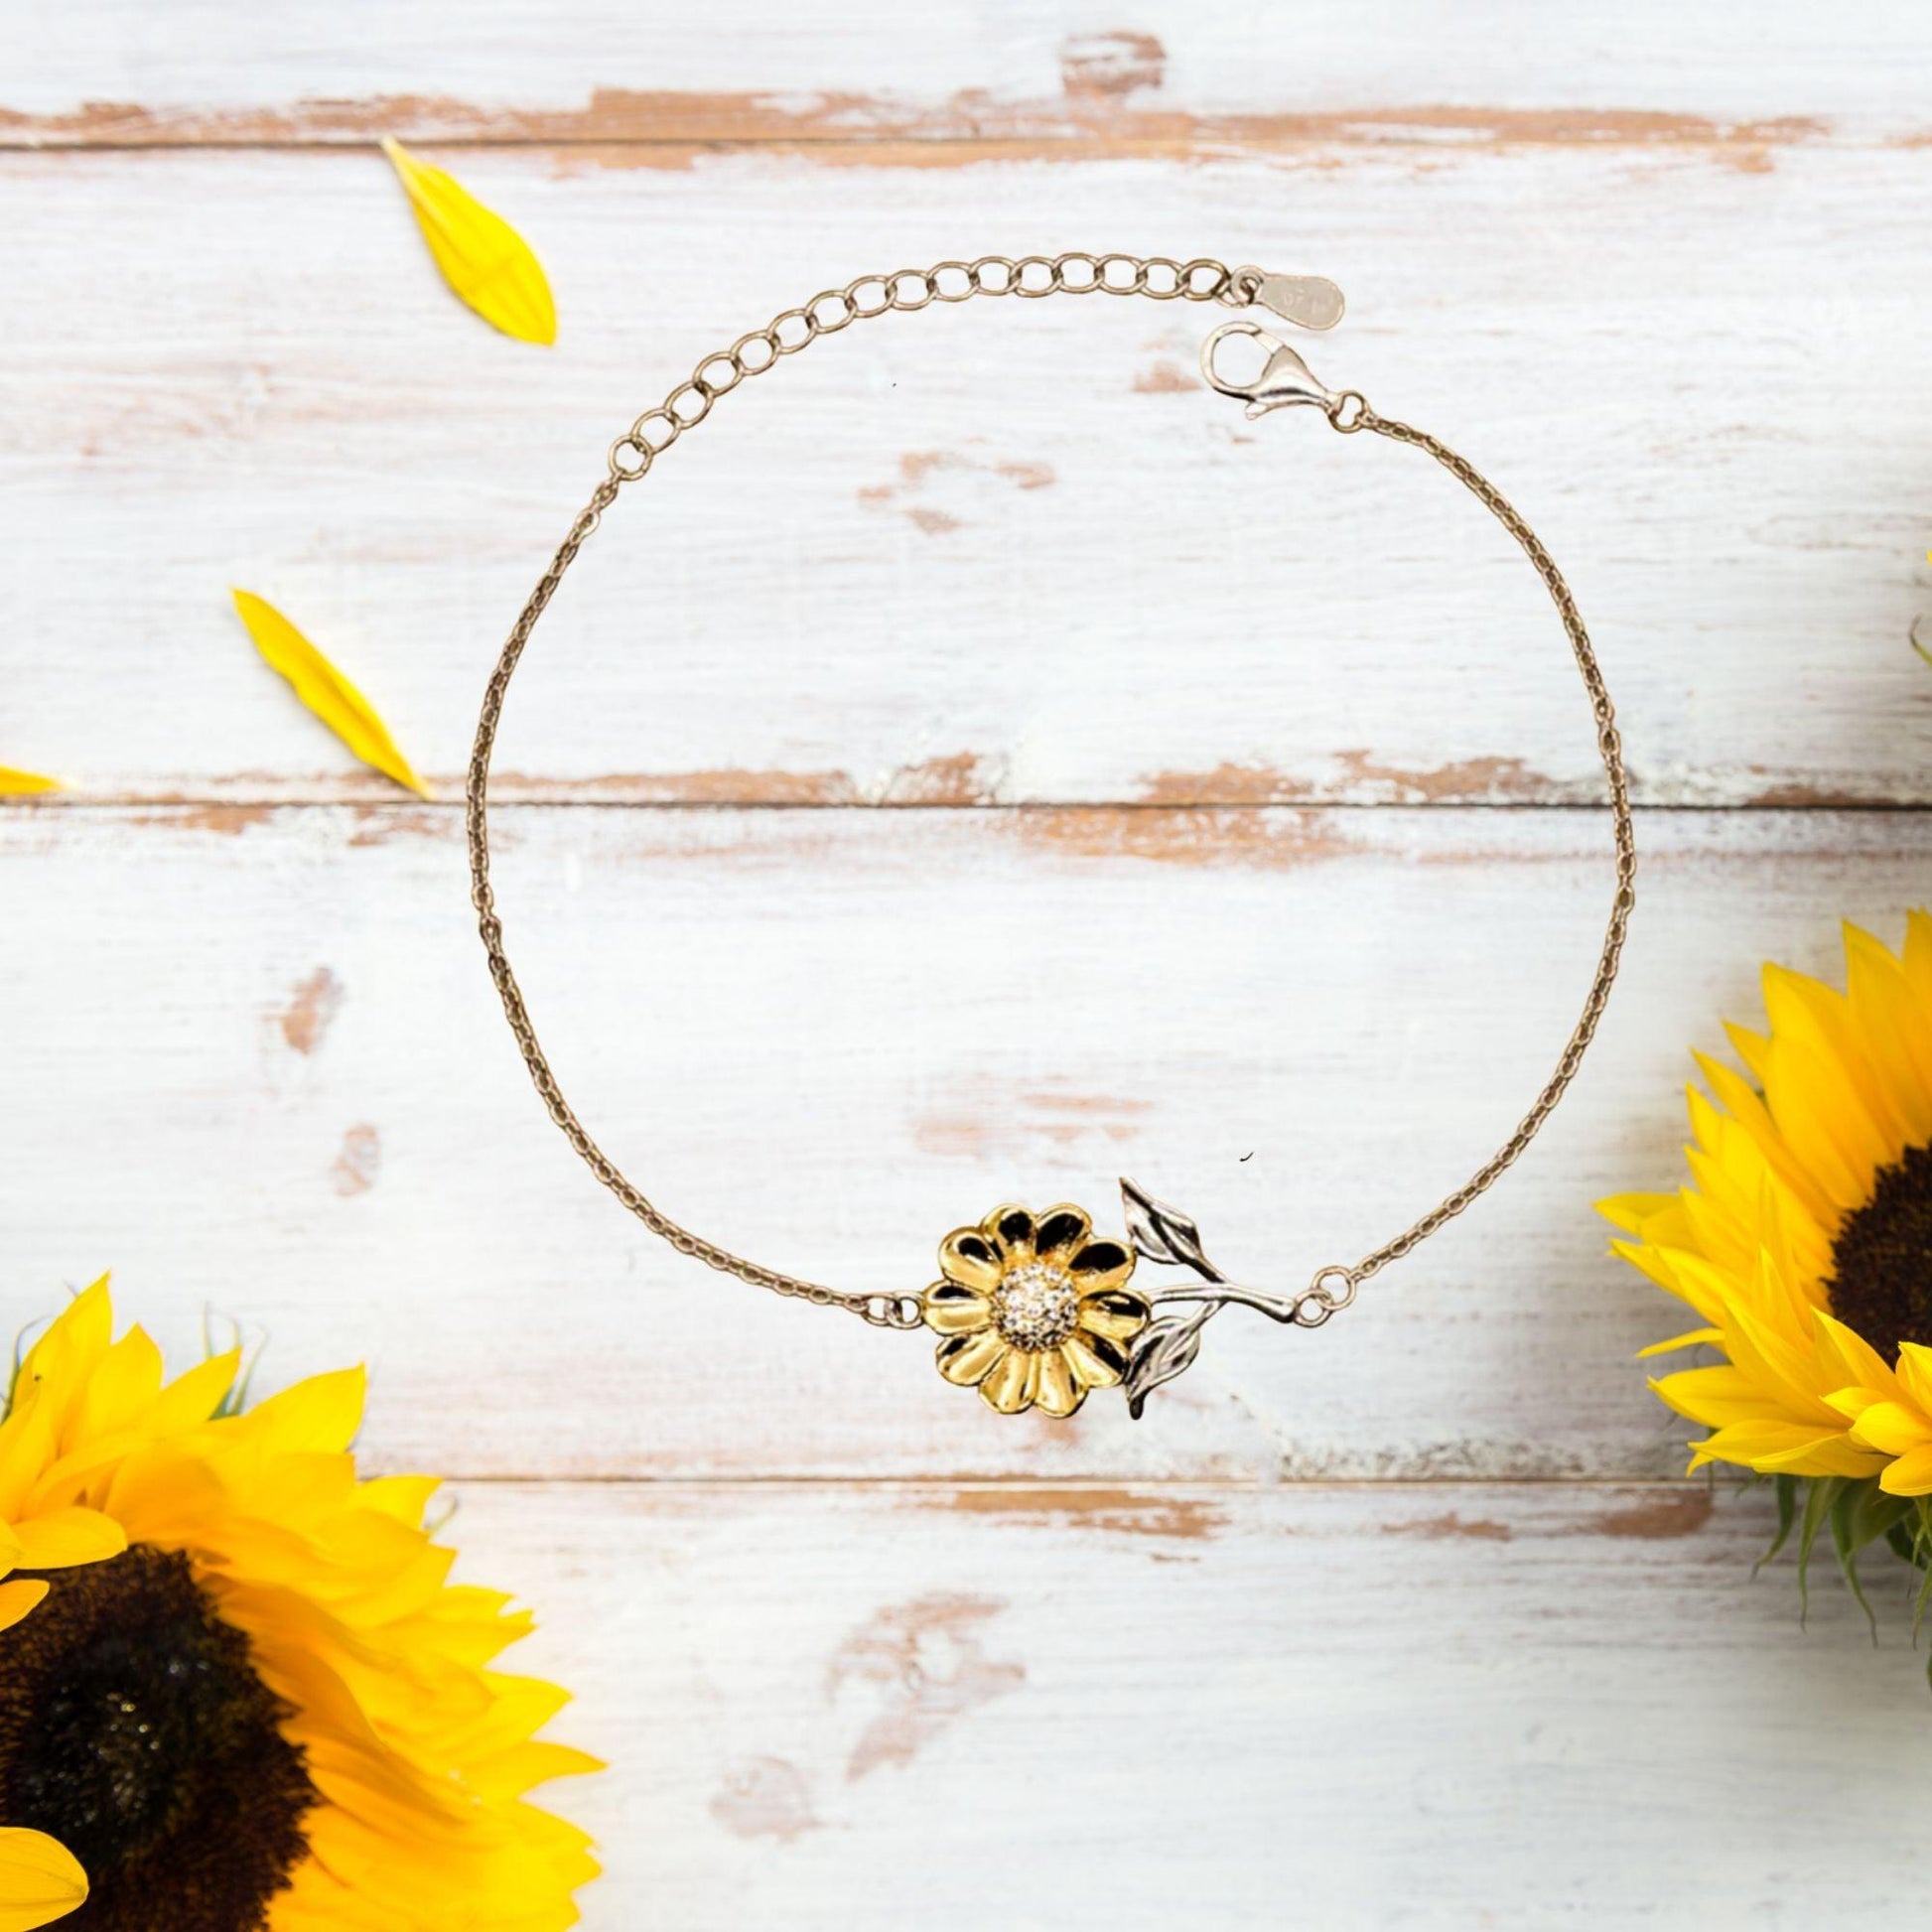 Remarkable Executive Assistant Gifts, Your dedication and hard work, Inspirational Birthday Christmas Unique Sunflower Bracelet For Executive Assistant, Coworkers, Men, Women, Friends - Mallard Moon Gift Shop